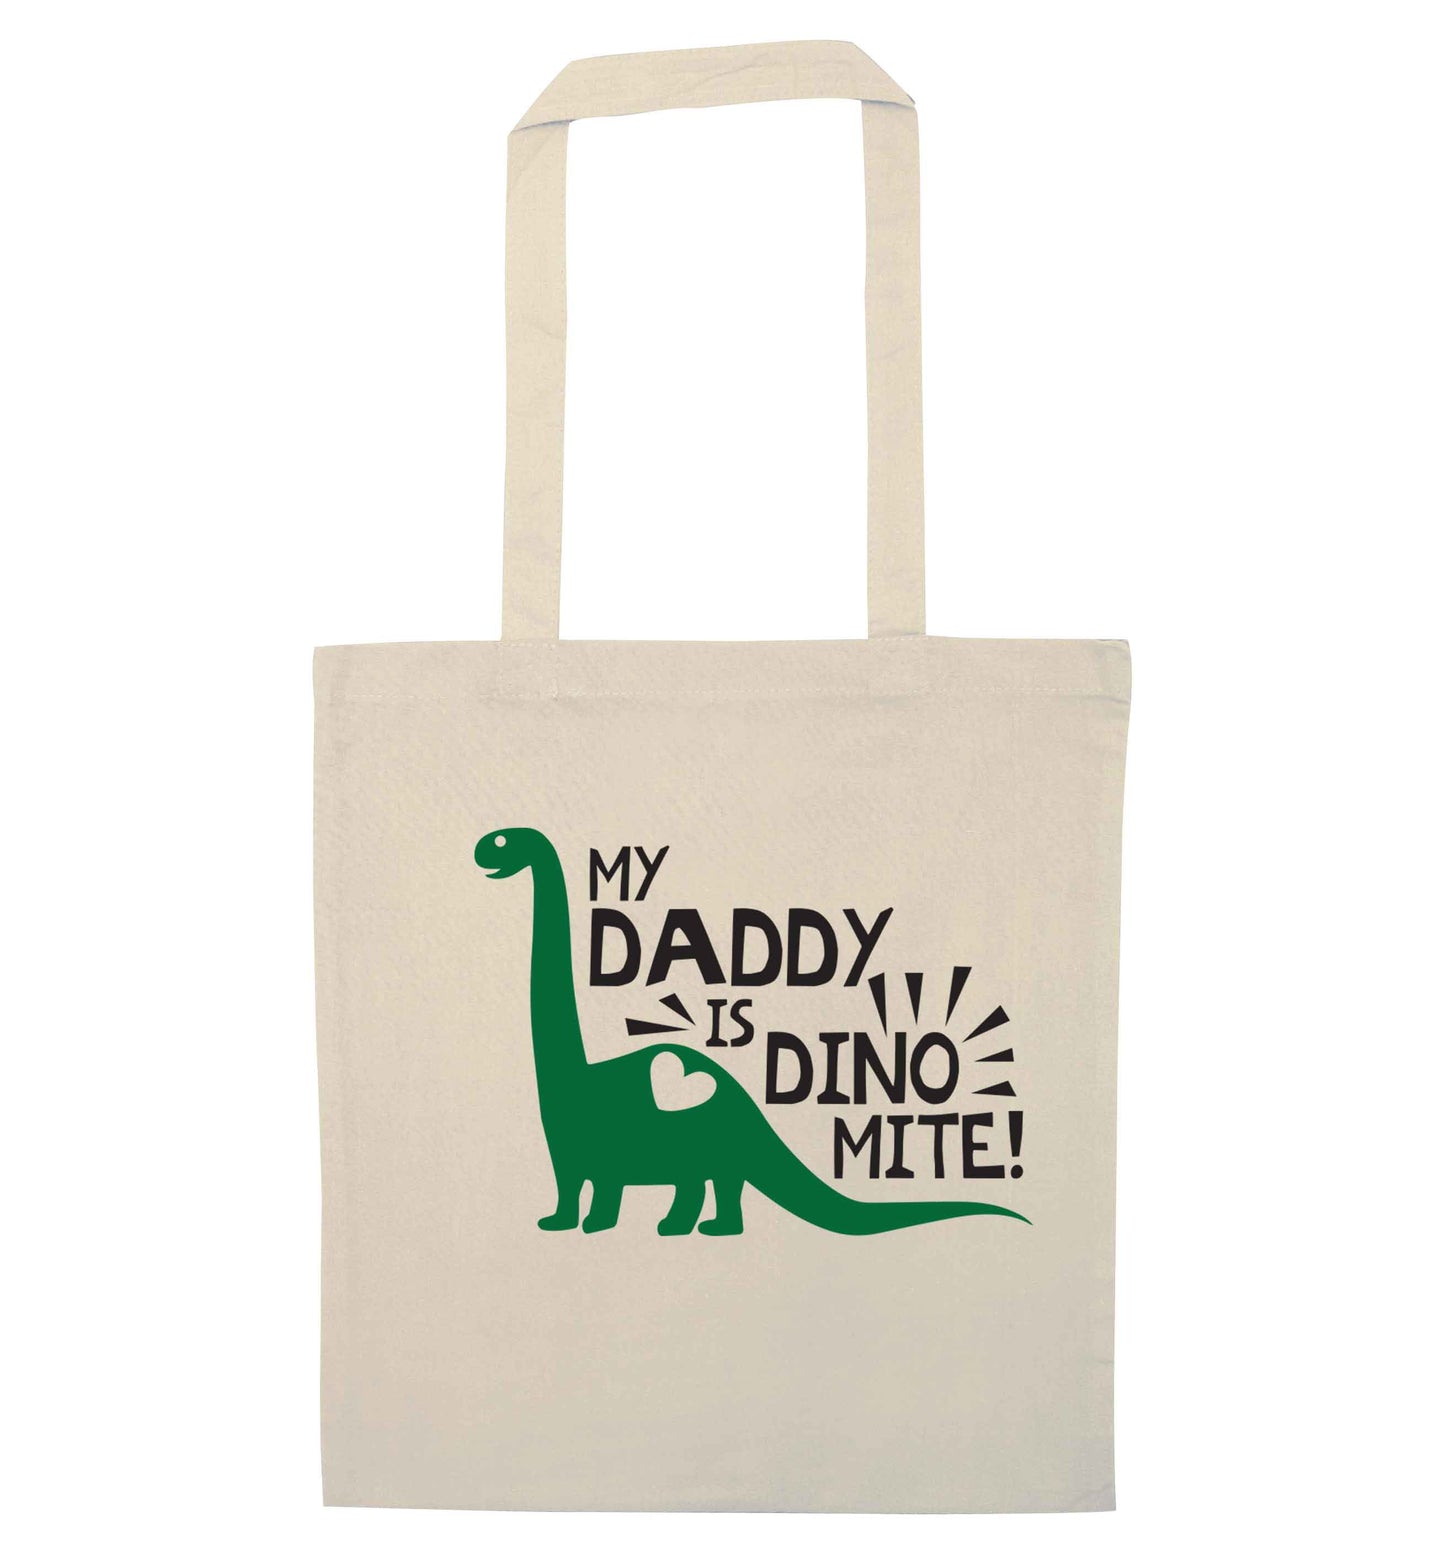 My daddy is dinomite! natural tote bag